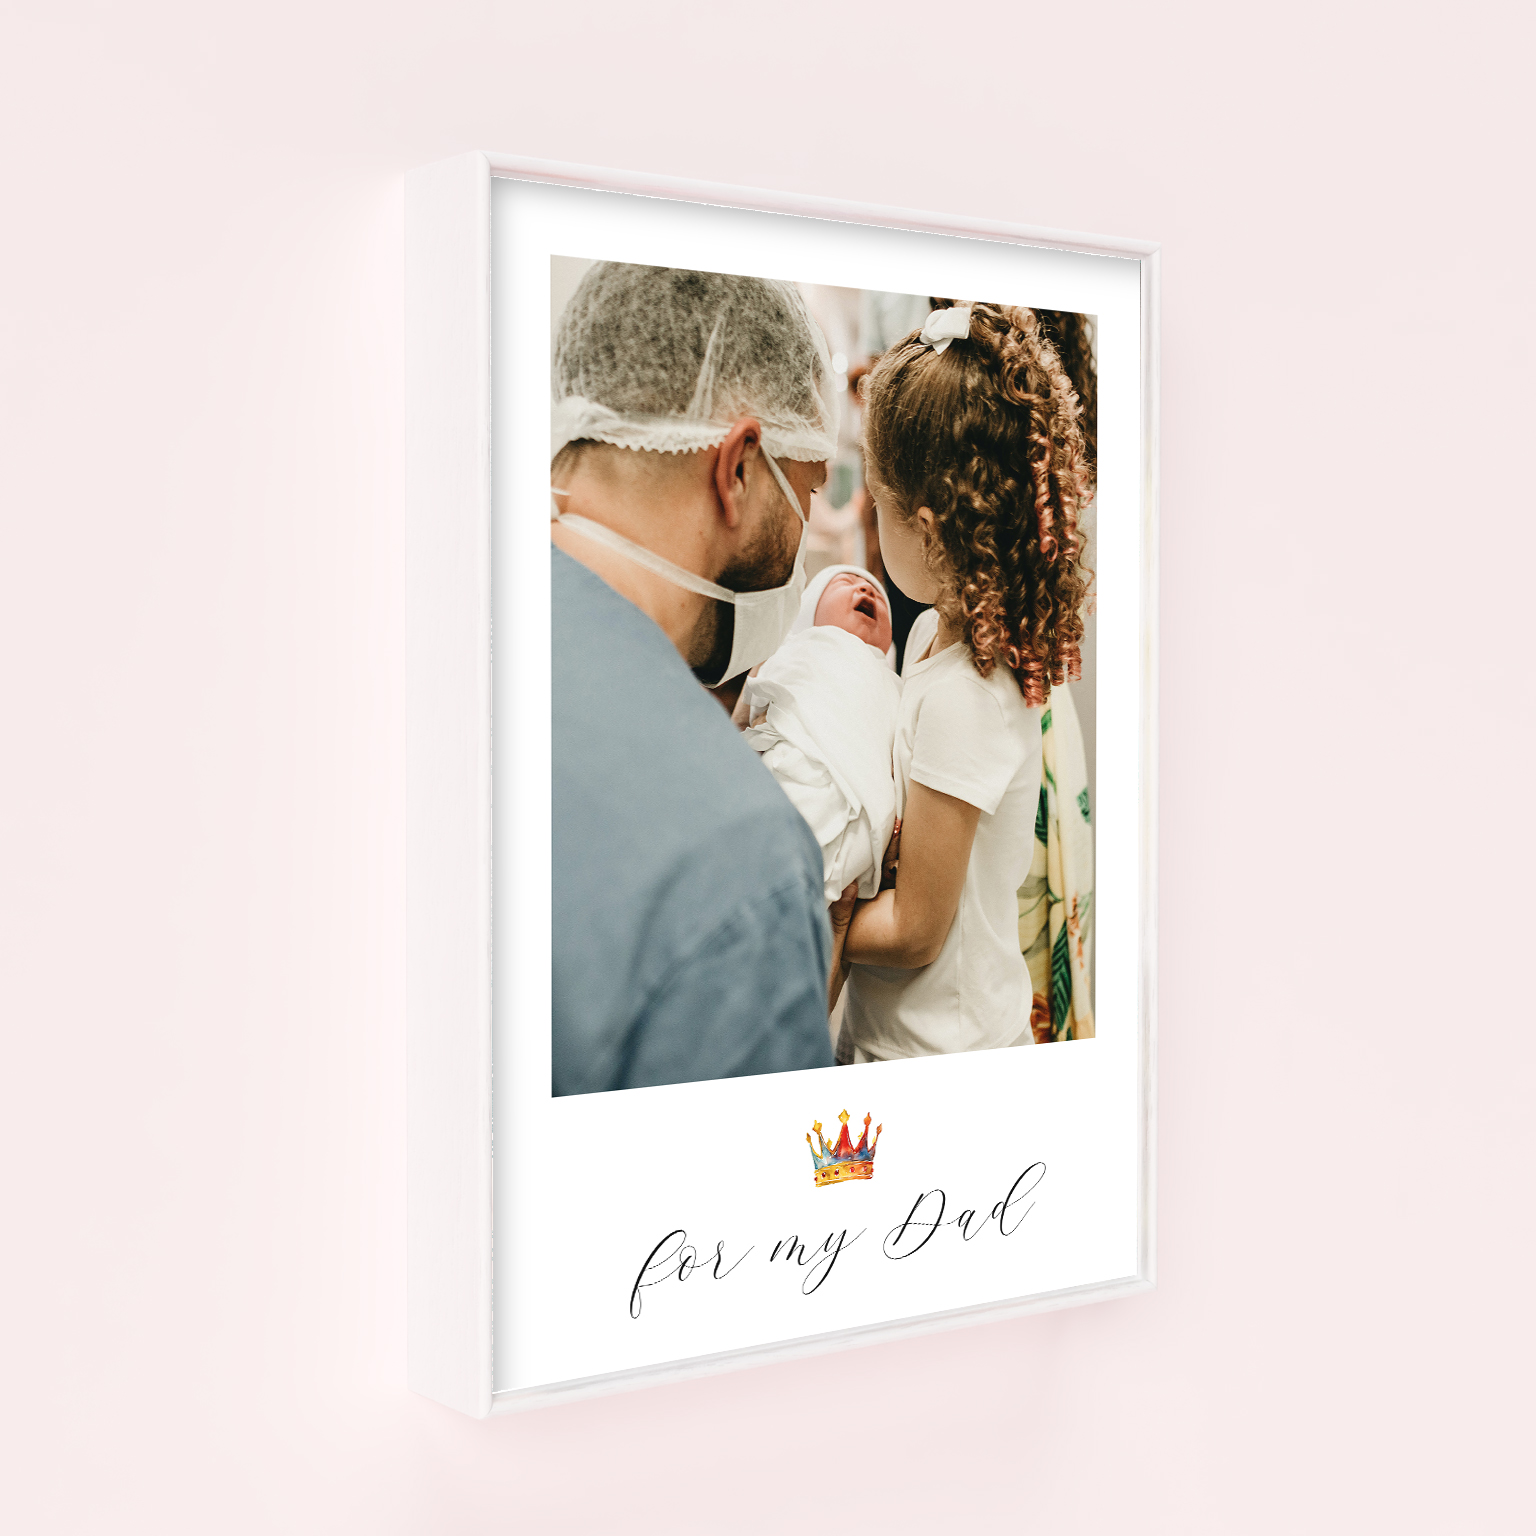  Personalized Box Framed Prints - Unique Custom Designs for Memorable Moments